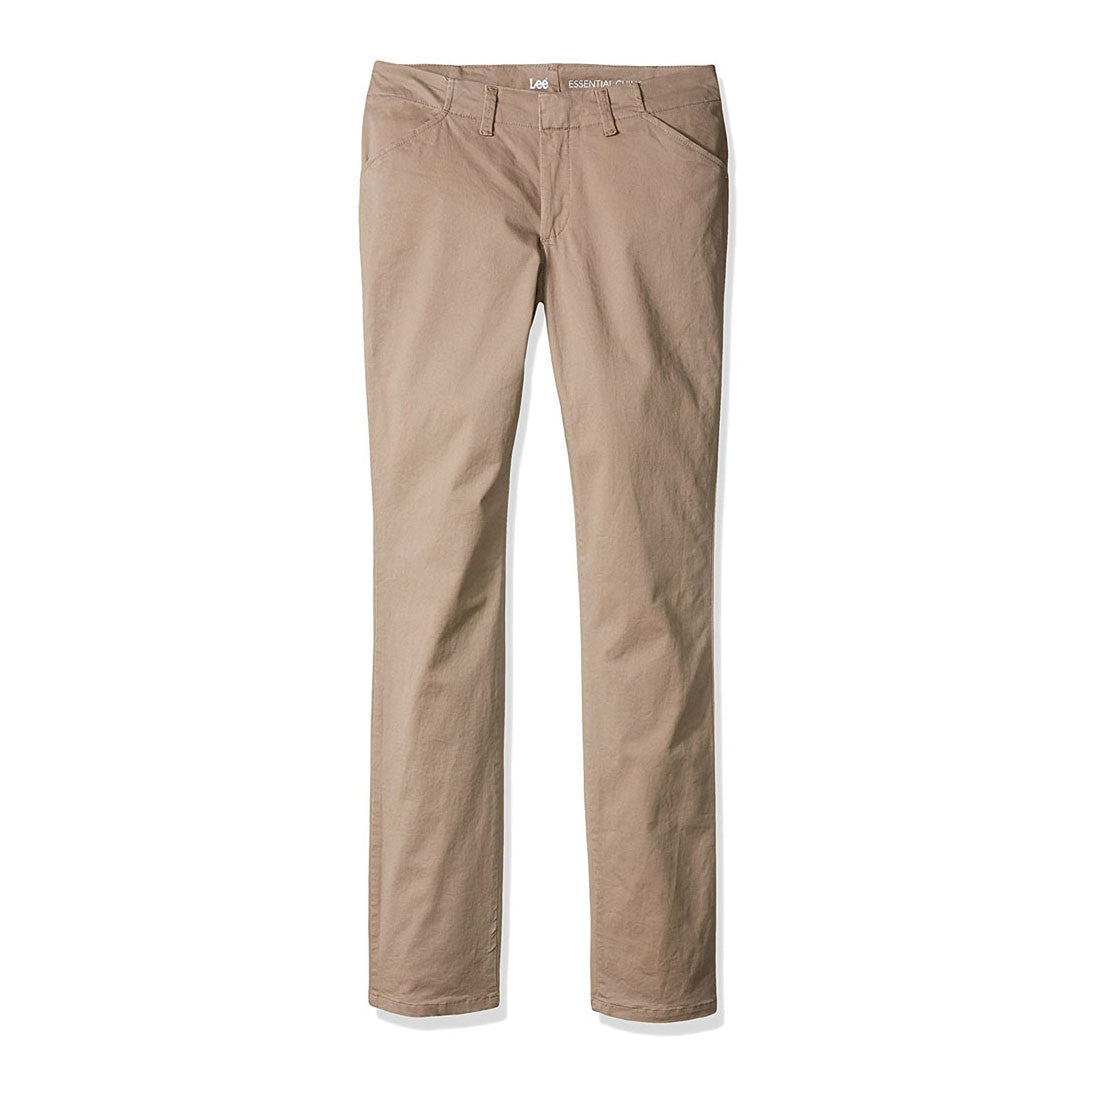 Lee Essential Chino Staight Leg Midrise Fit Pant